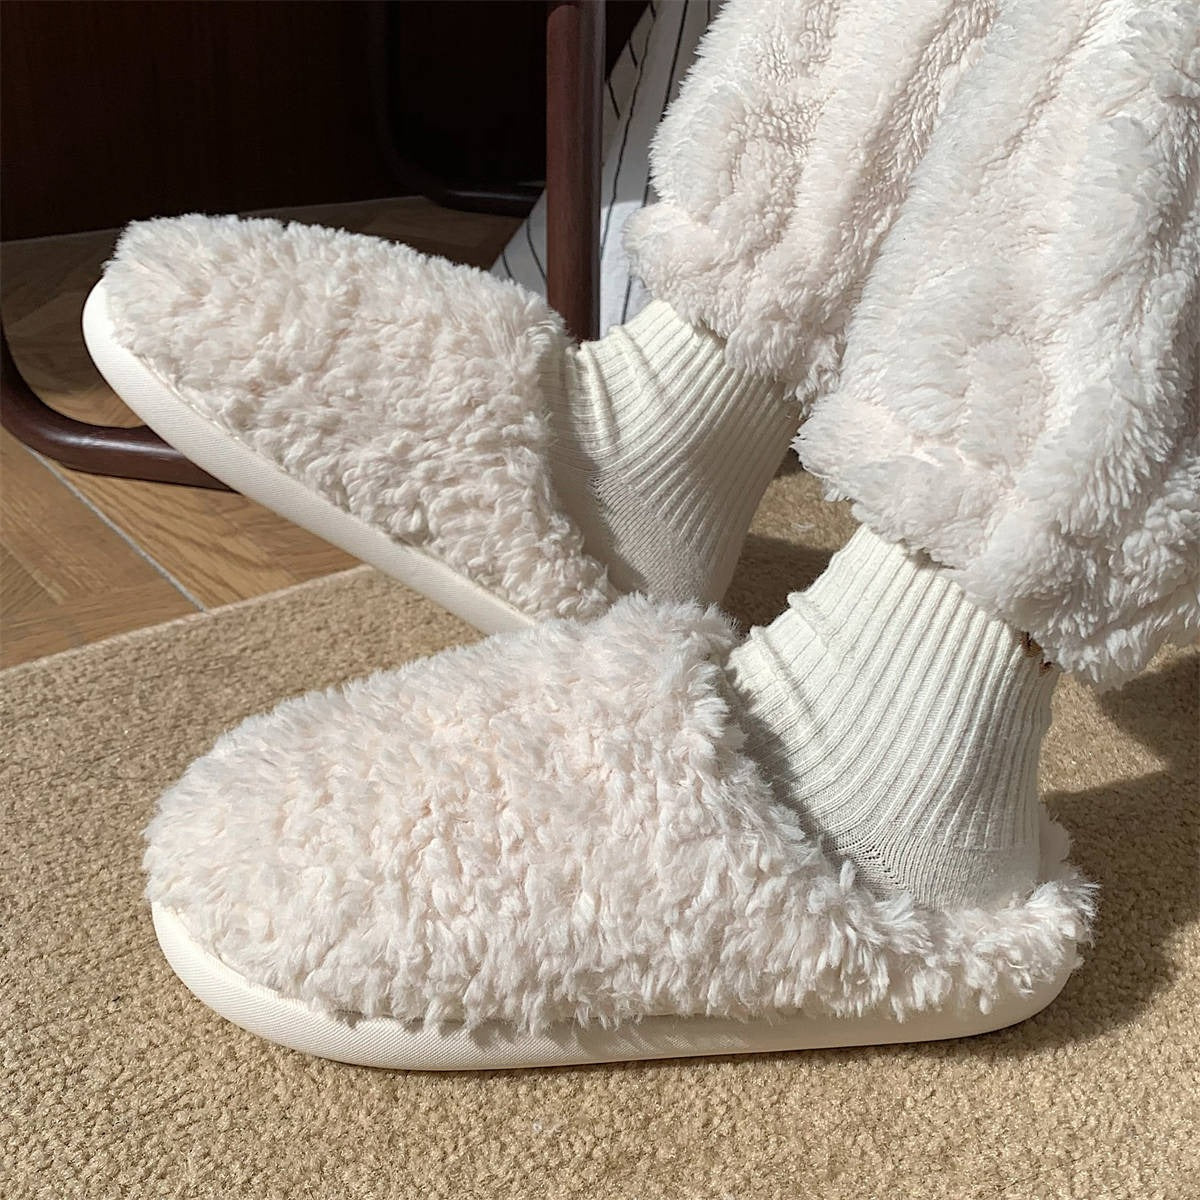 Winter student simple home warm cotton slippers for women fashion indoor plush shoes